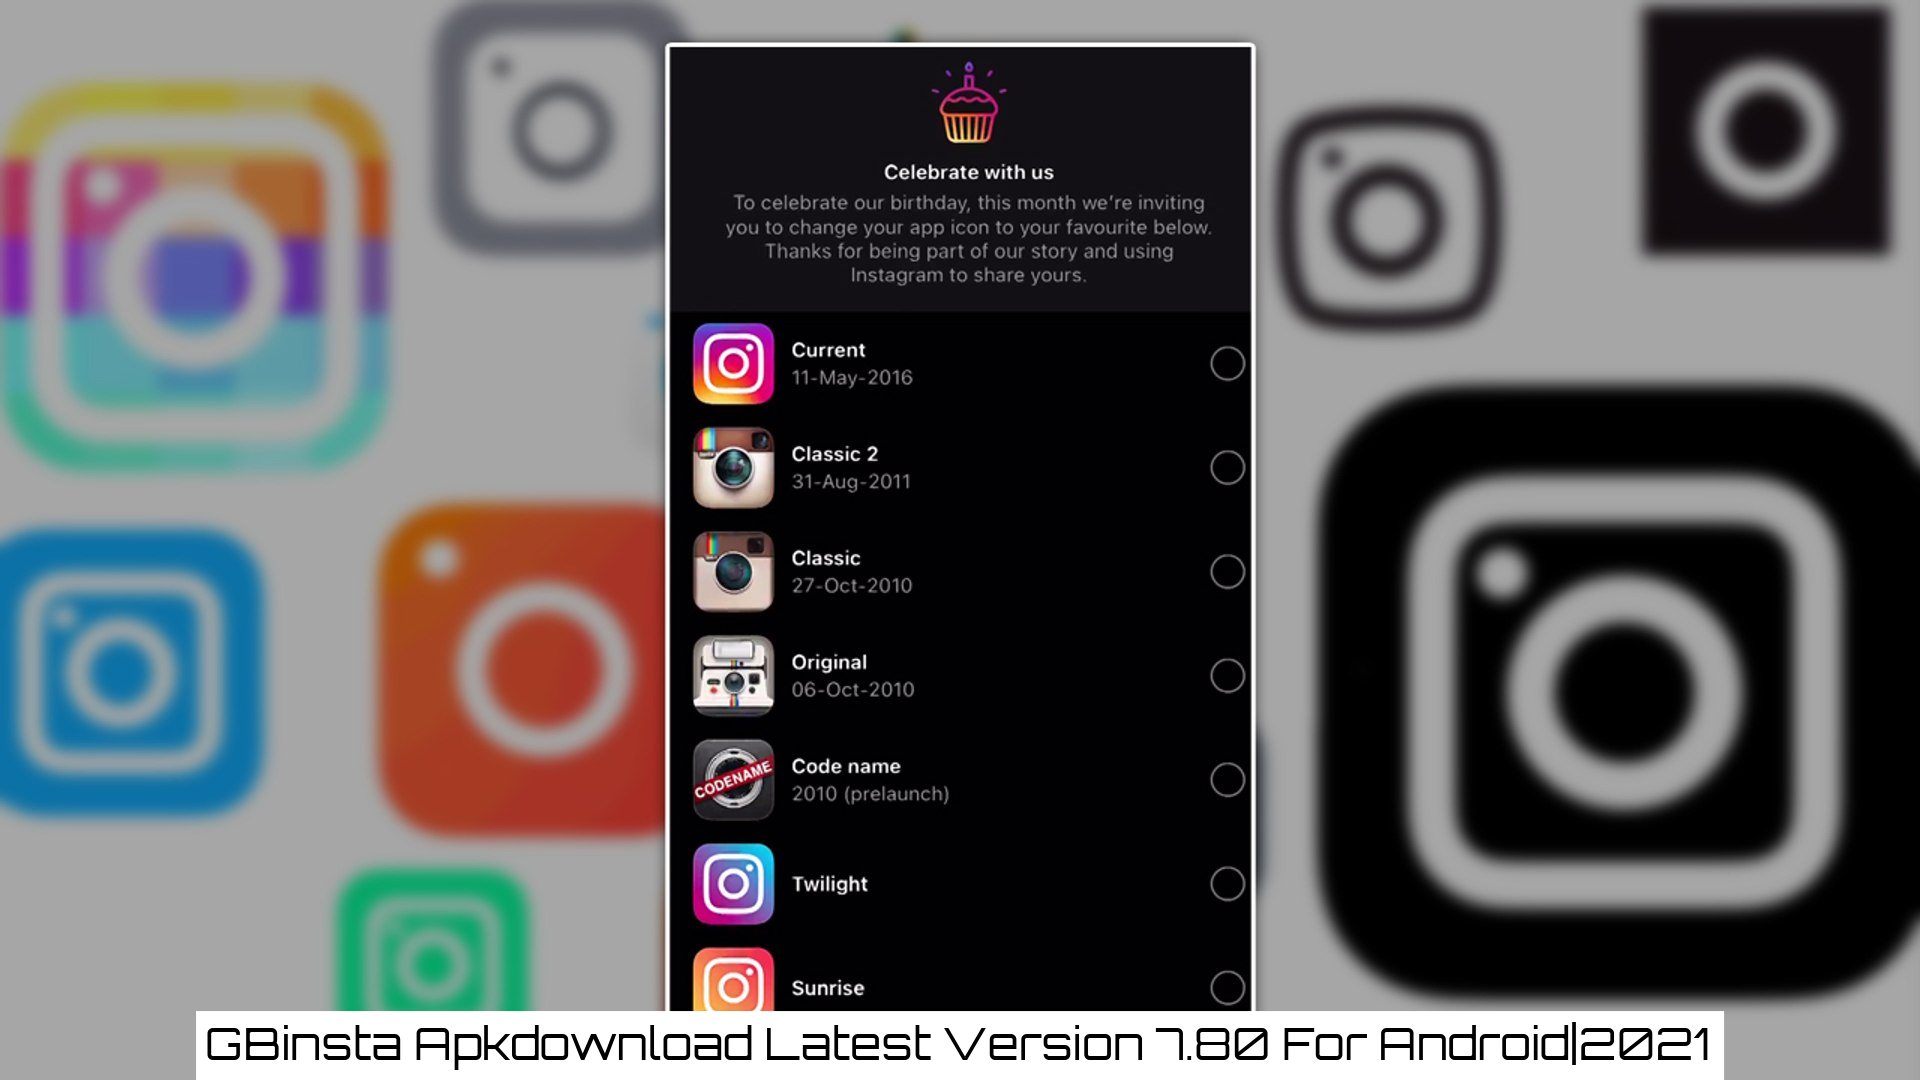 You are currently viewing GBinsta Apkdownload Latest Version 7.80 For Android|2021